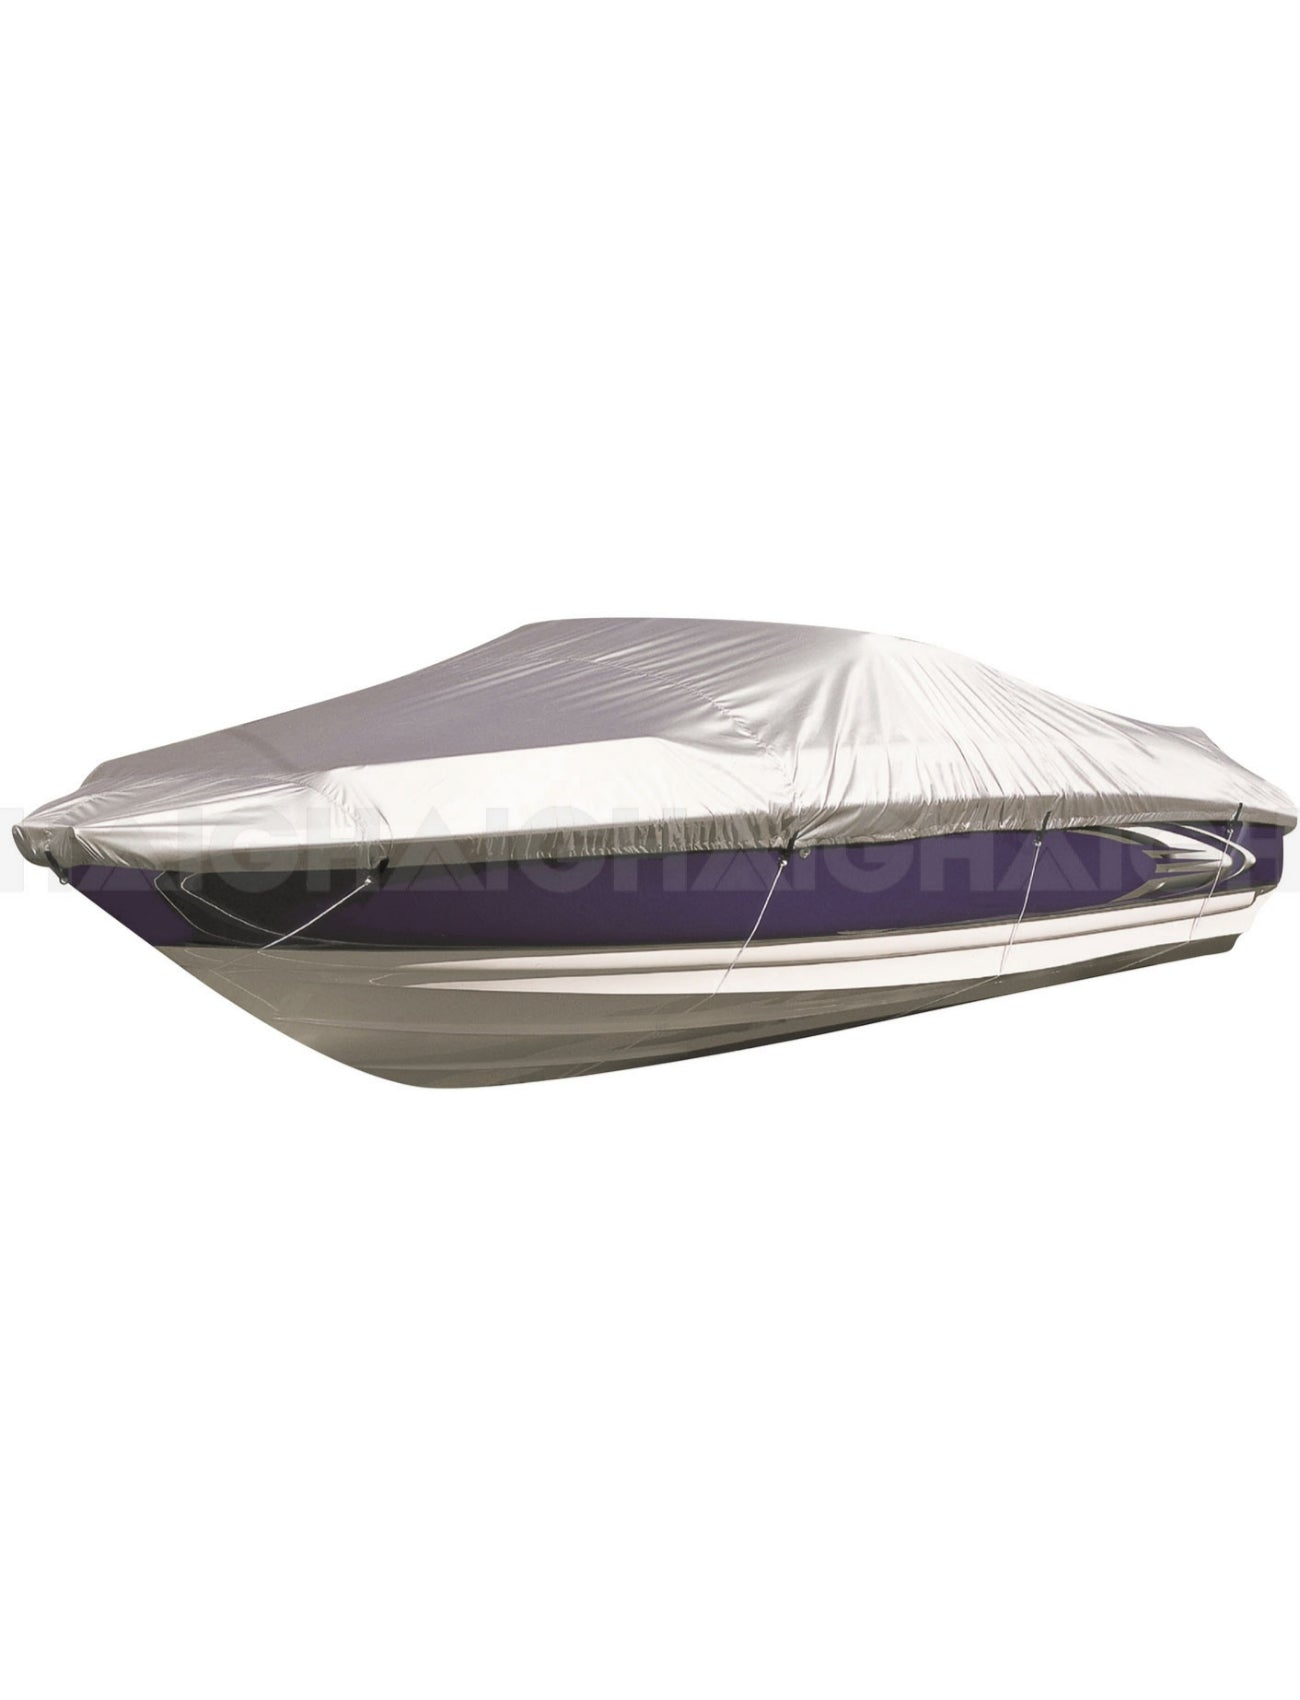 BOAT COVER SUNLAND FITS 4.3m - 4.8m